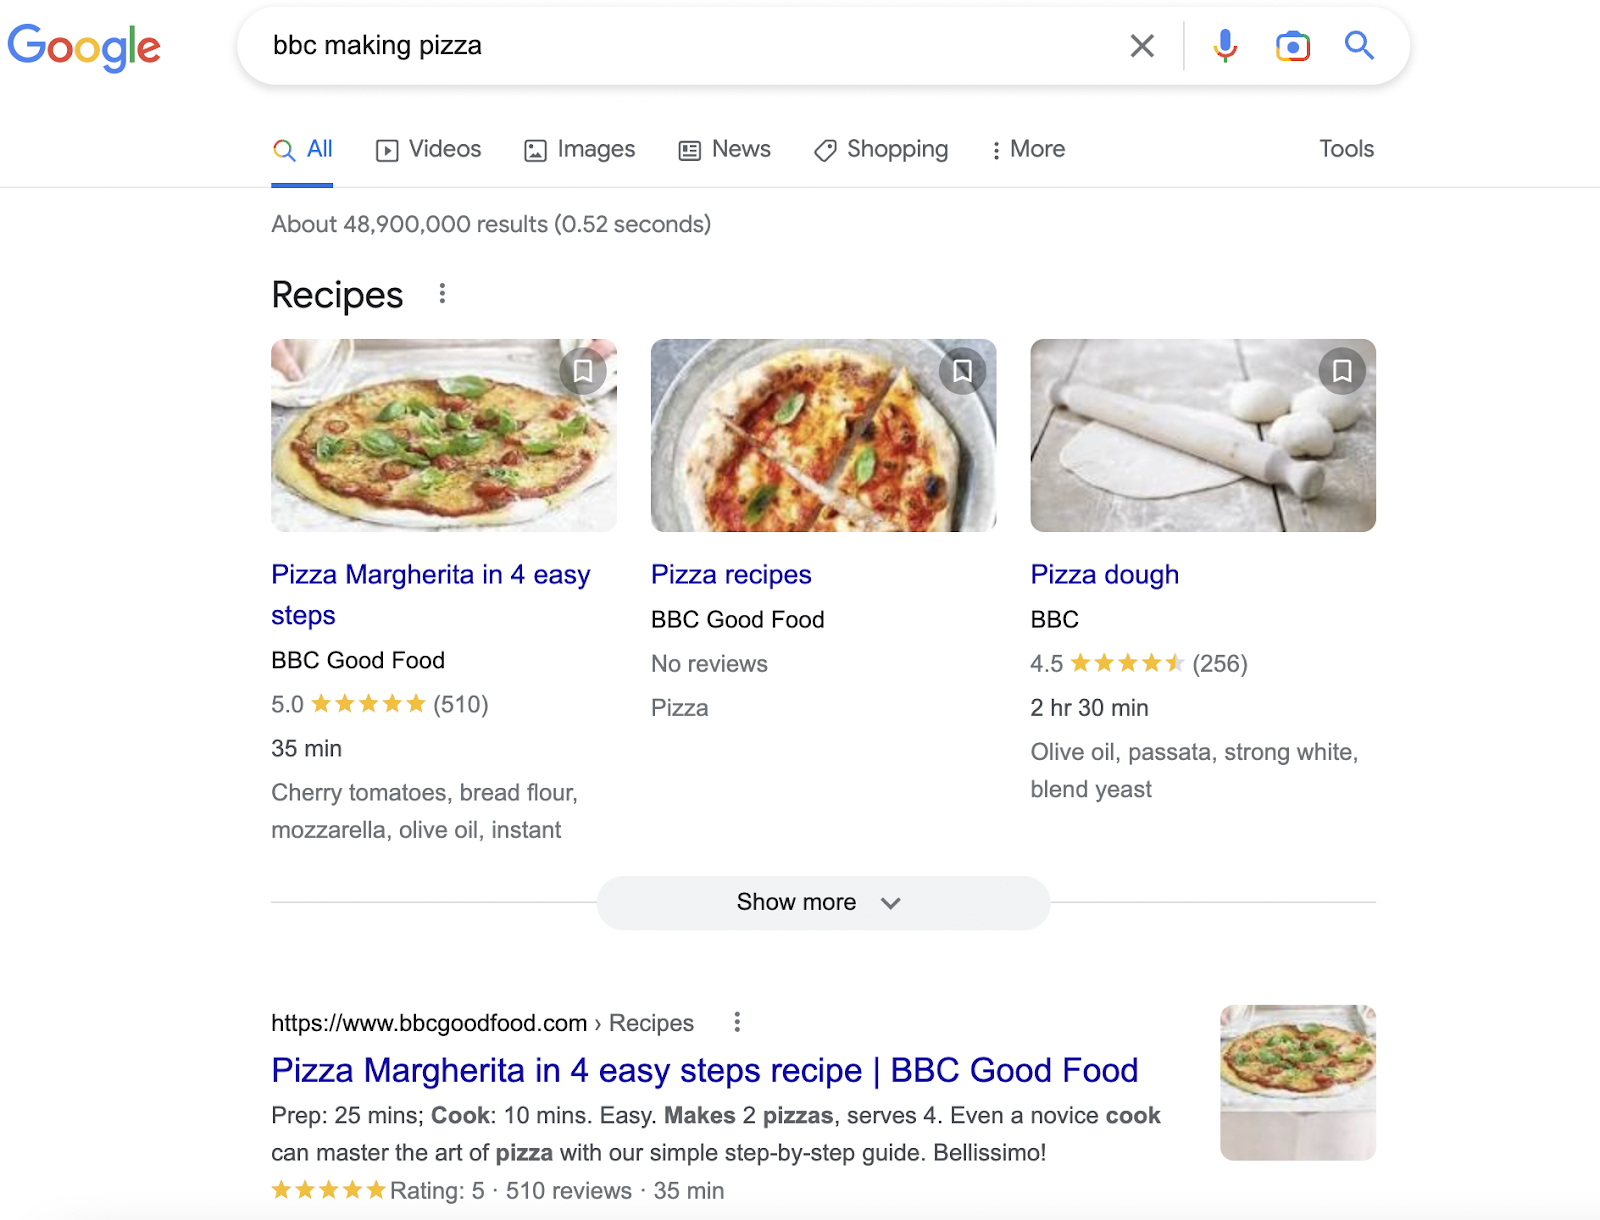 Navigational search intent example